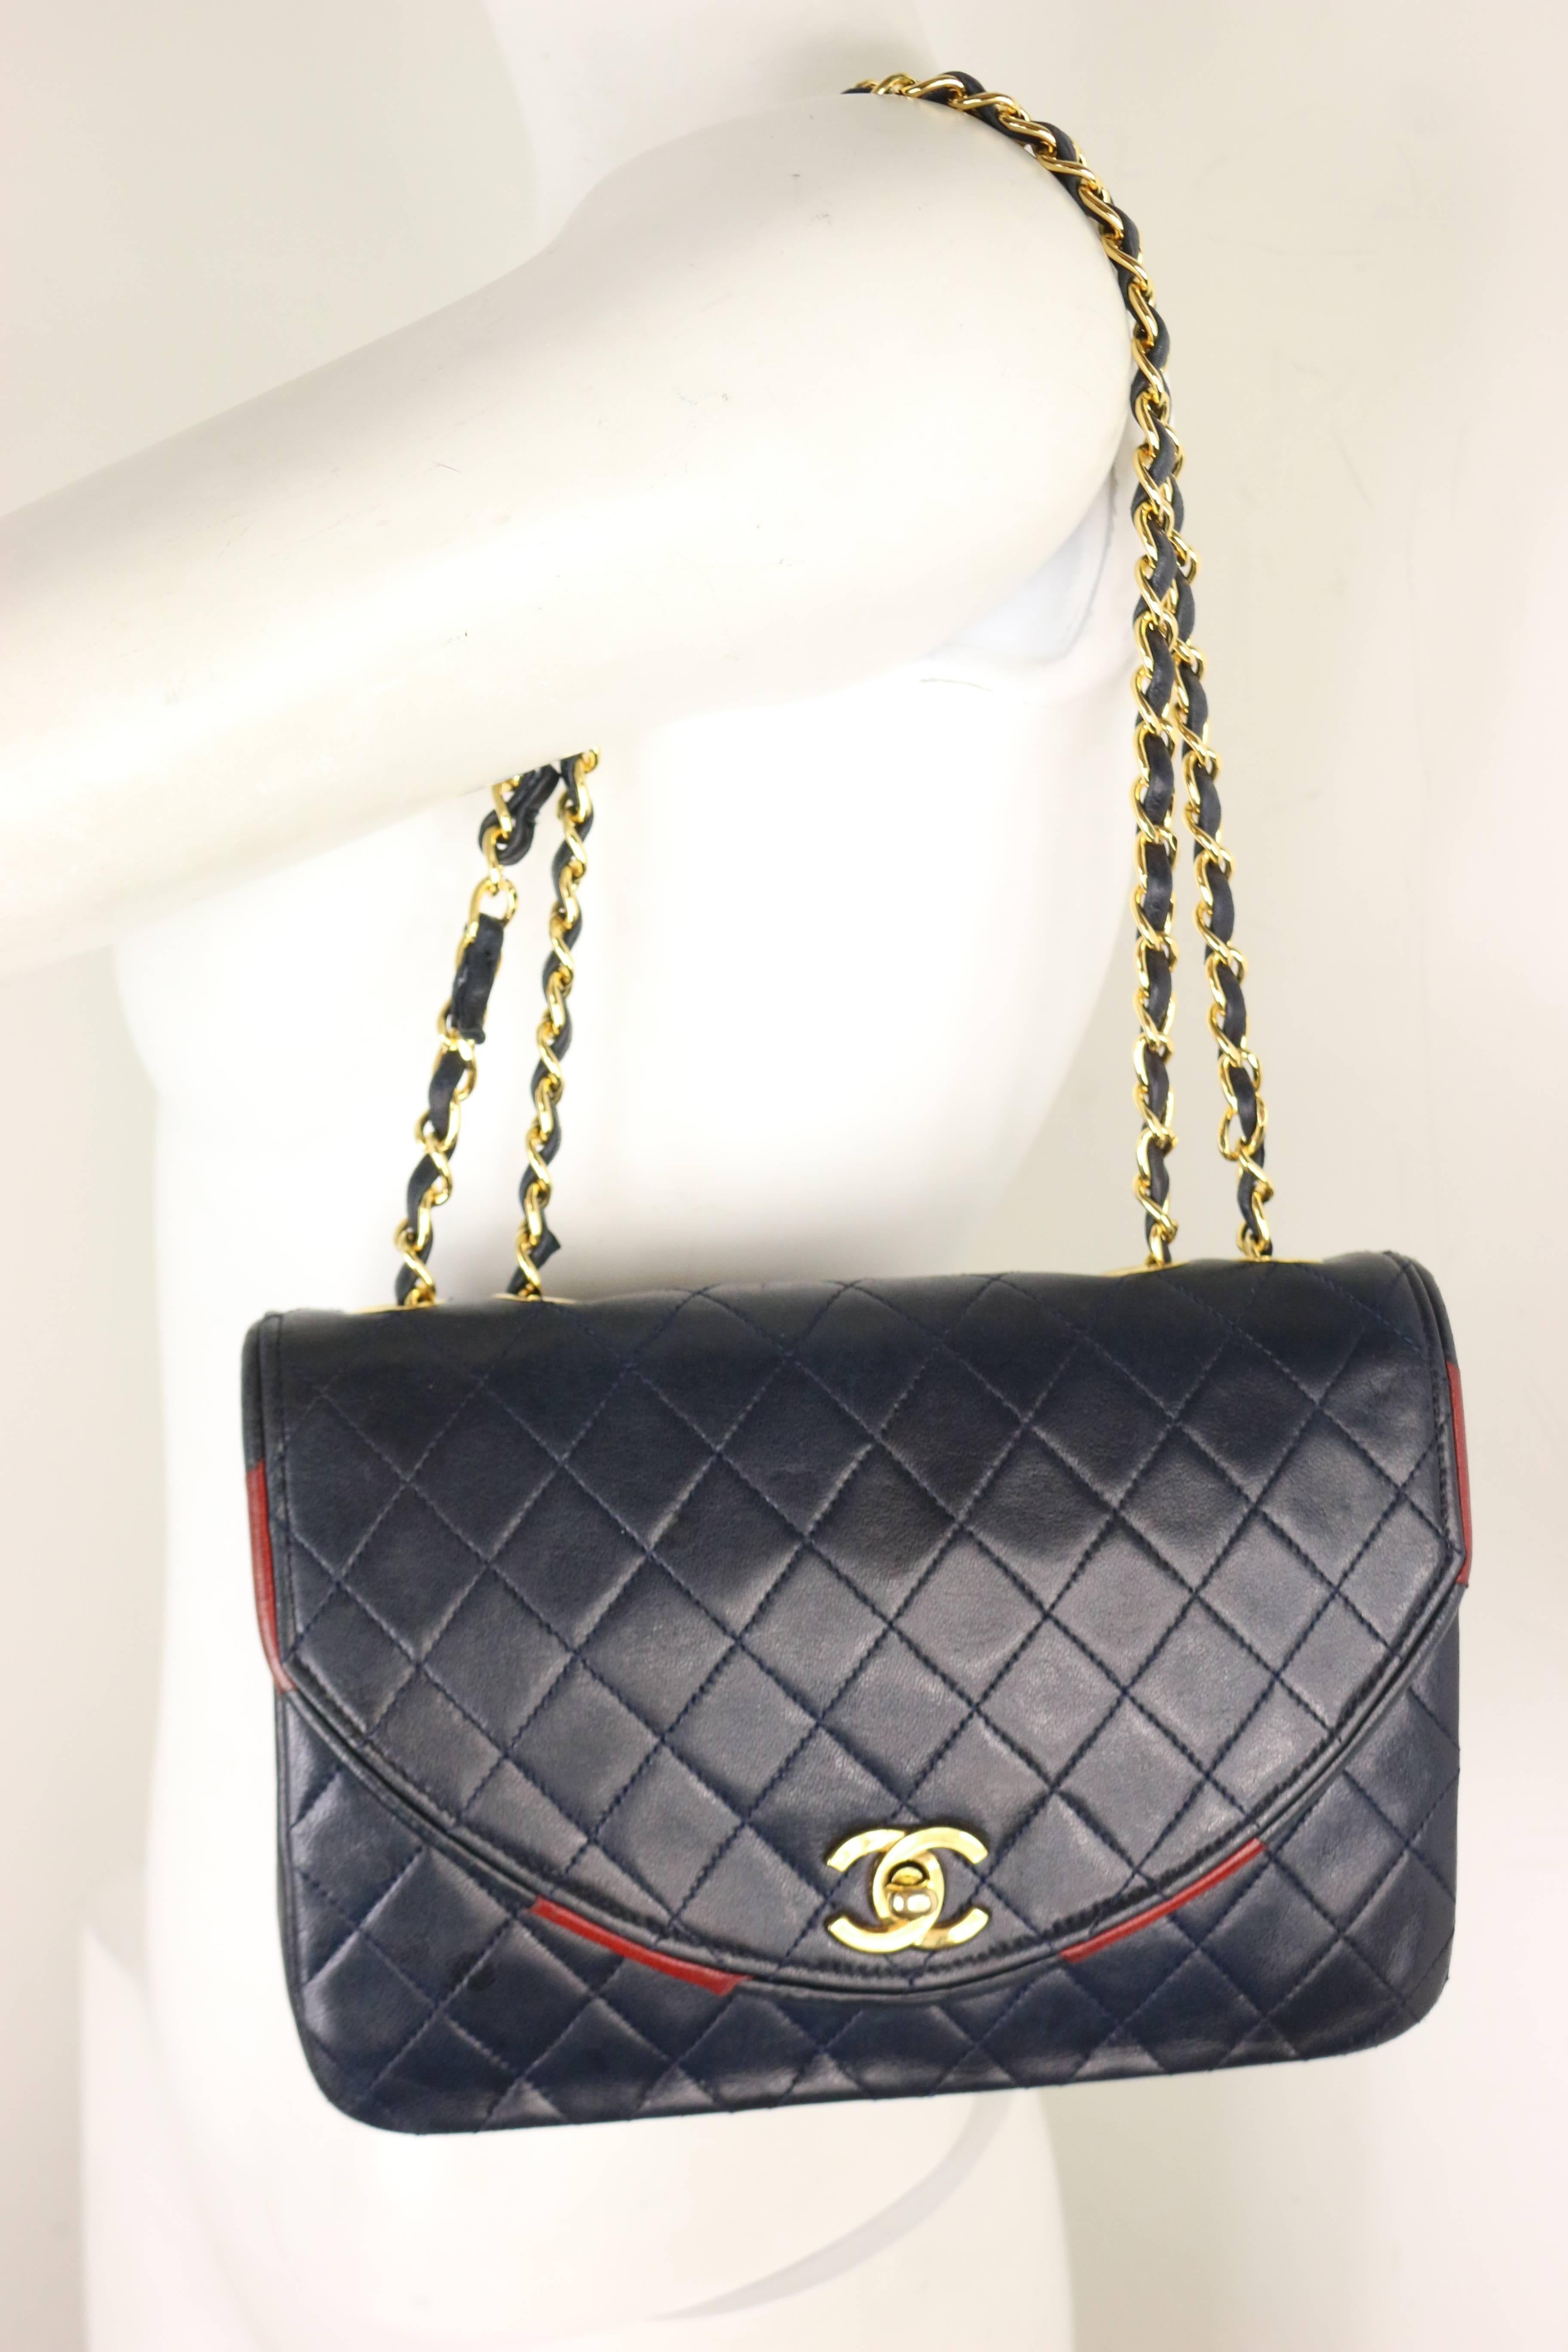 Chanel Classic Navy Quilted Lambskin Leather Red / Navy Trim Flap Shoulder Bag  11